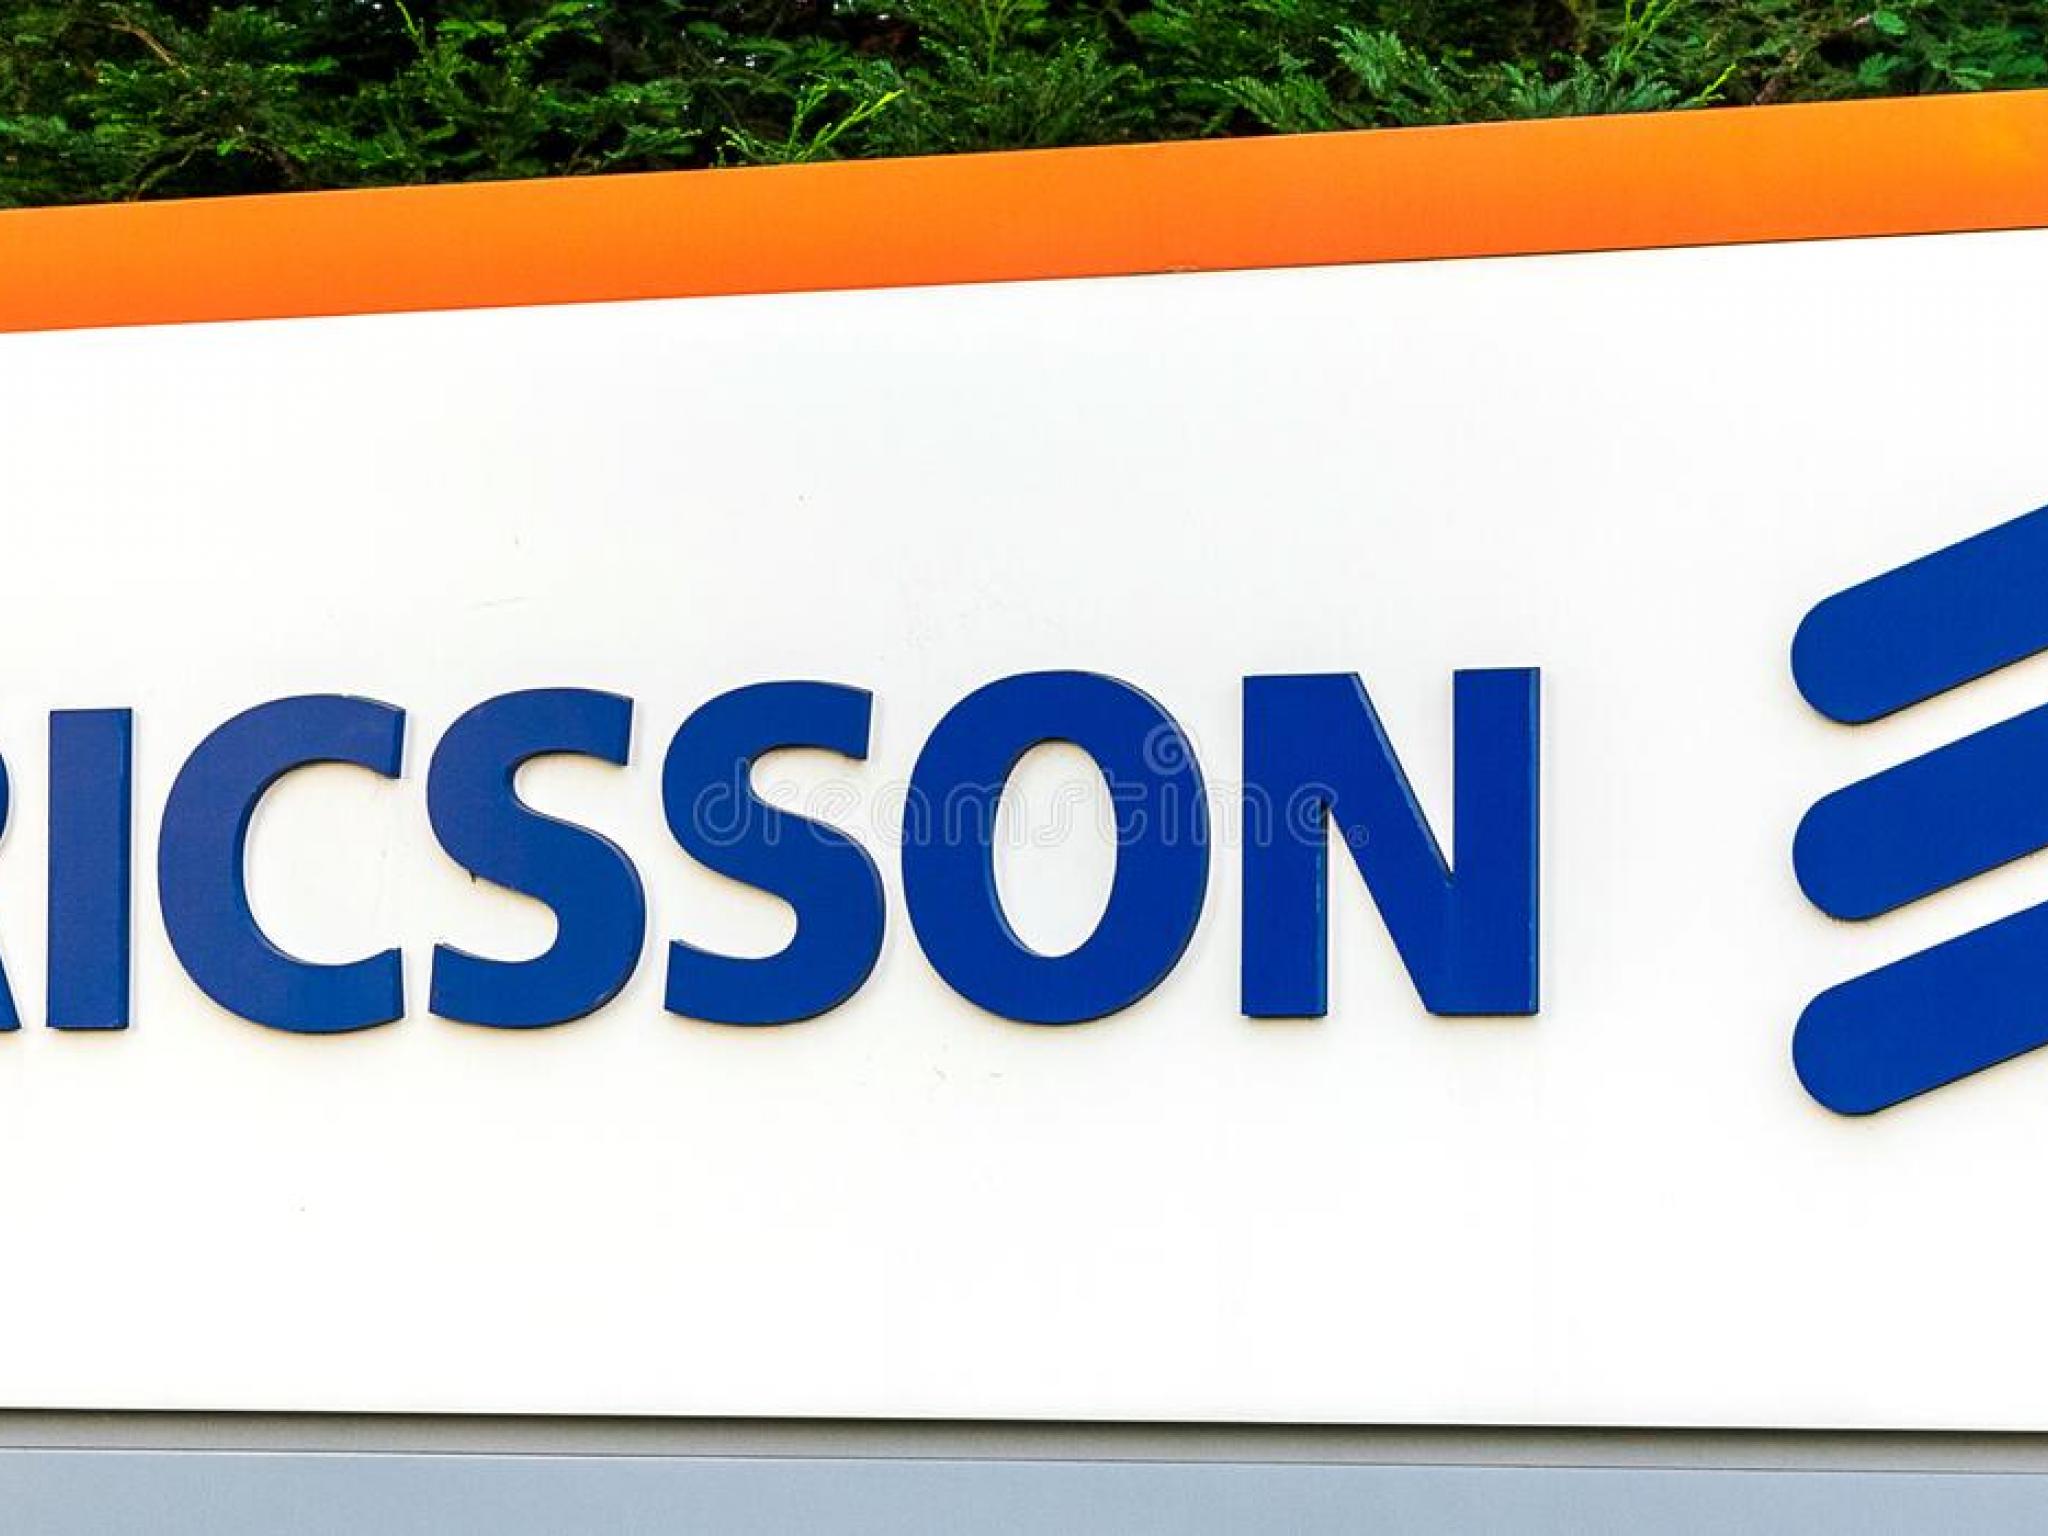  why-is-ericsson-down-by-9-22-stocks-moving-in-thursdays-pre-market-session 